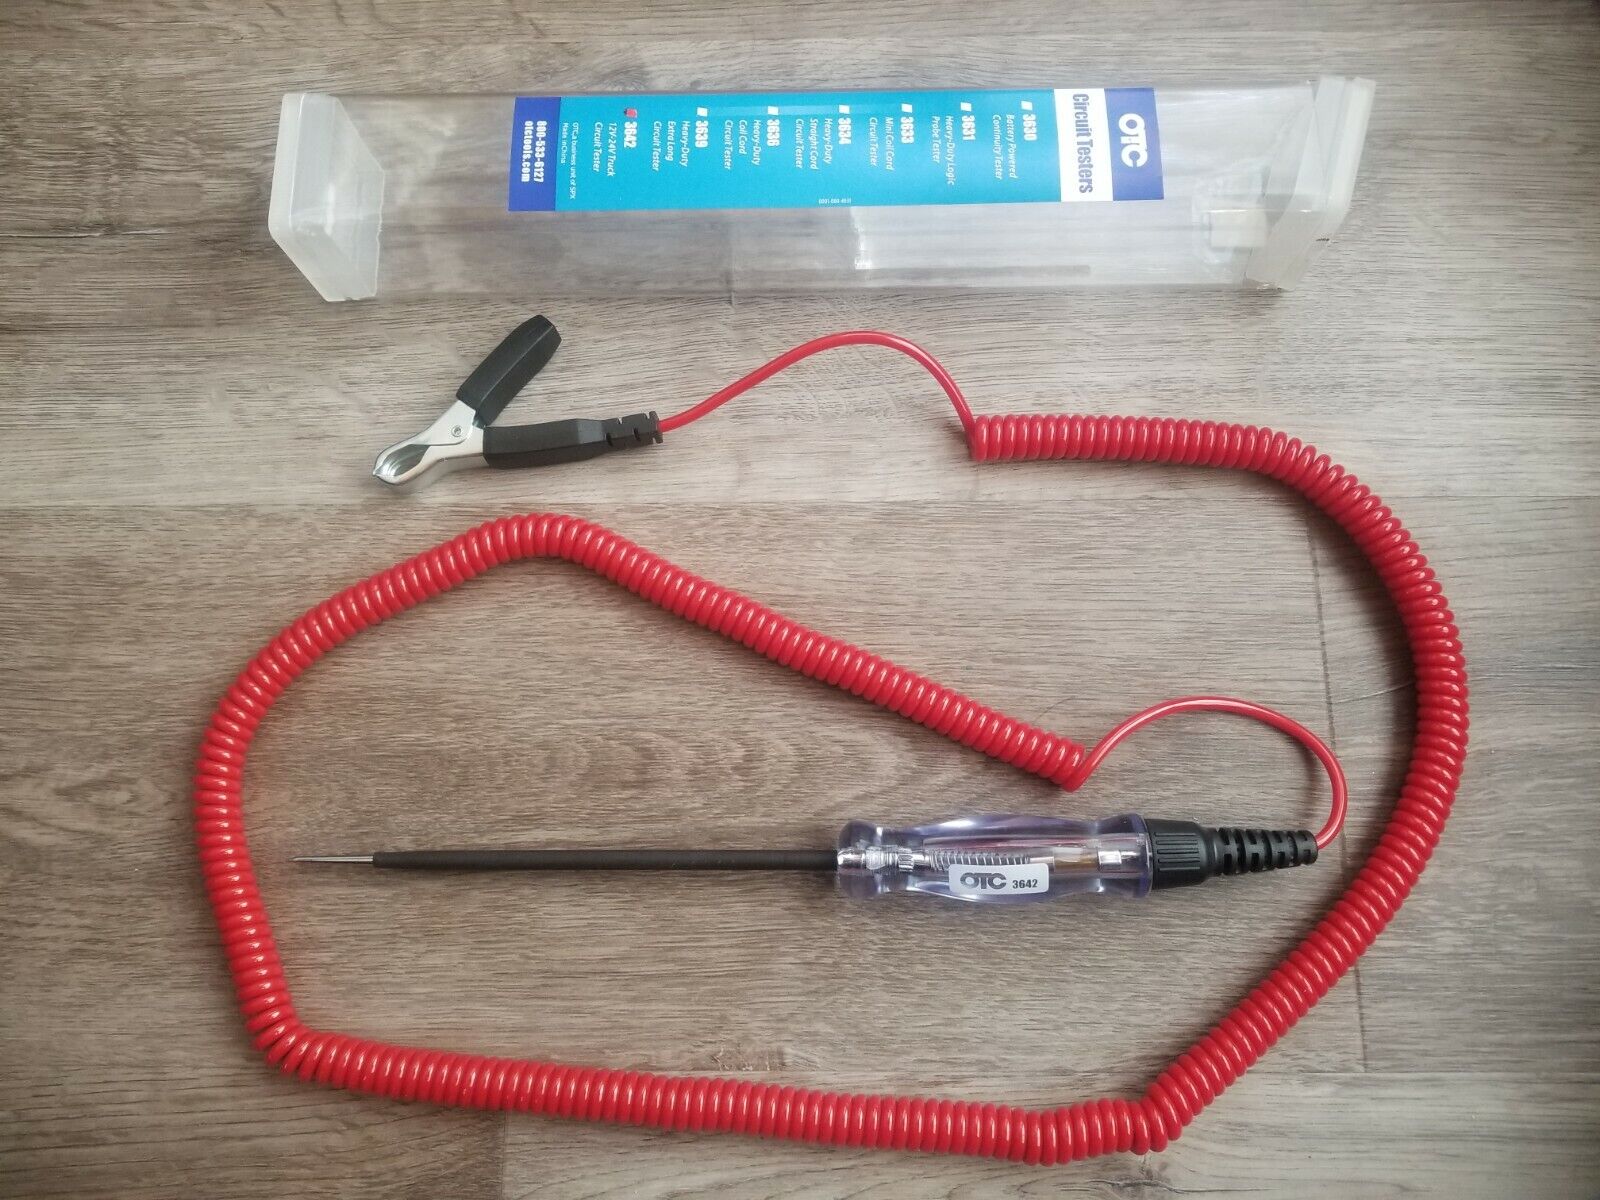 New OTC 12-24V HD Truck Circuit Tester / Test Light w/ Extra Large Clamp #3642